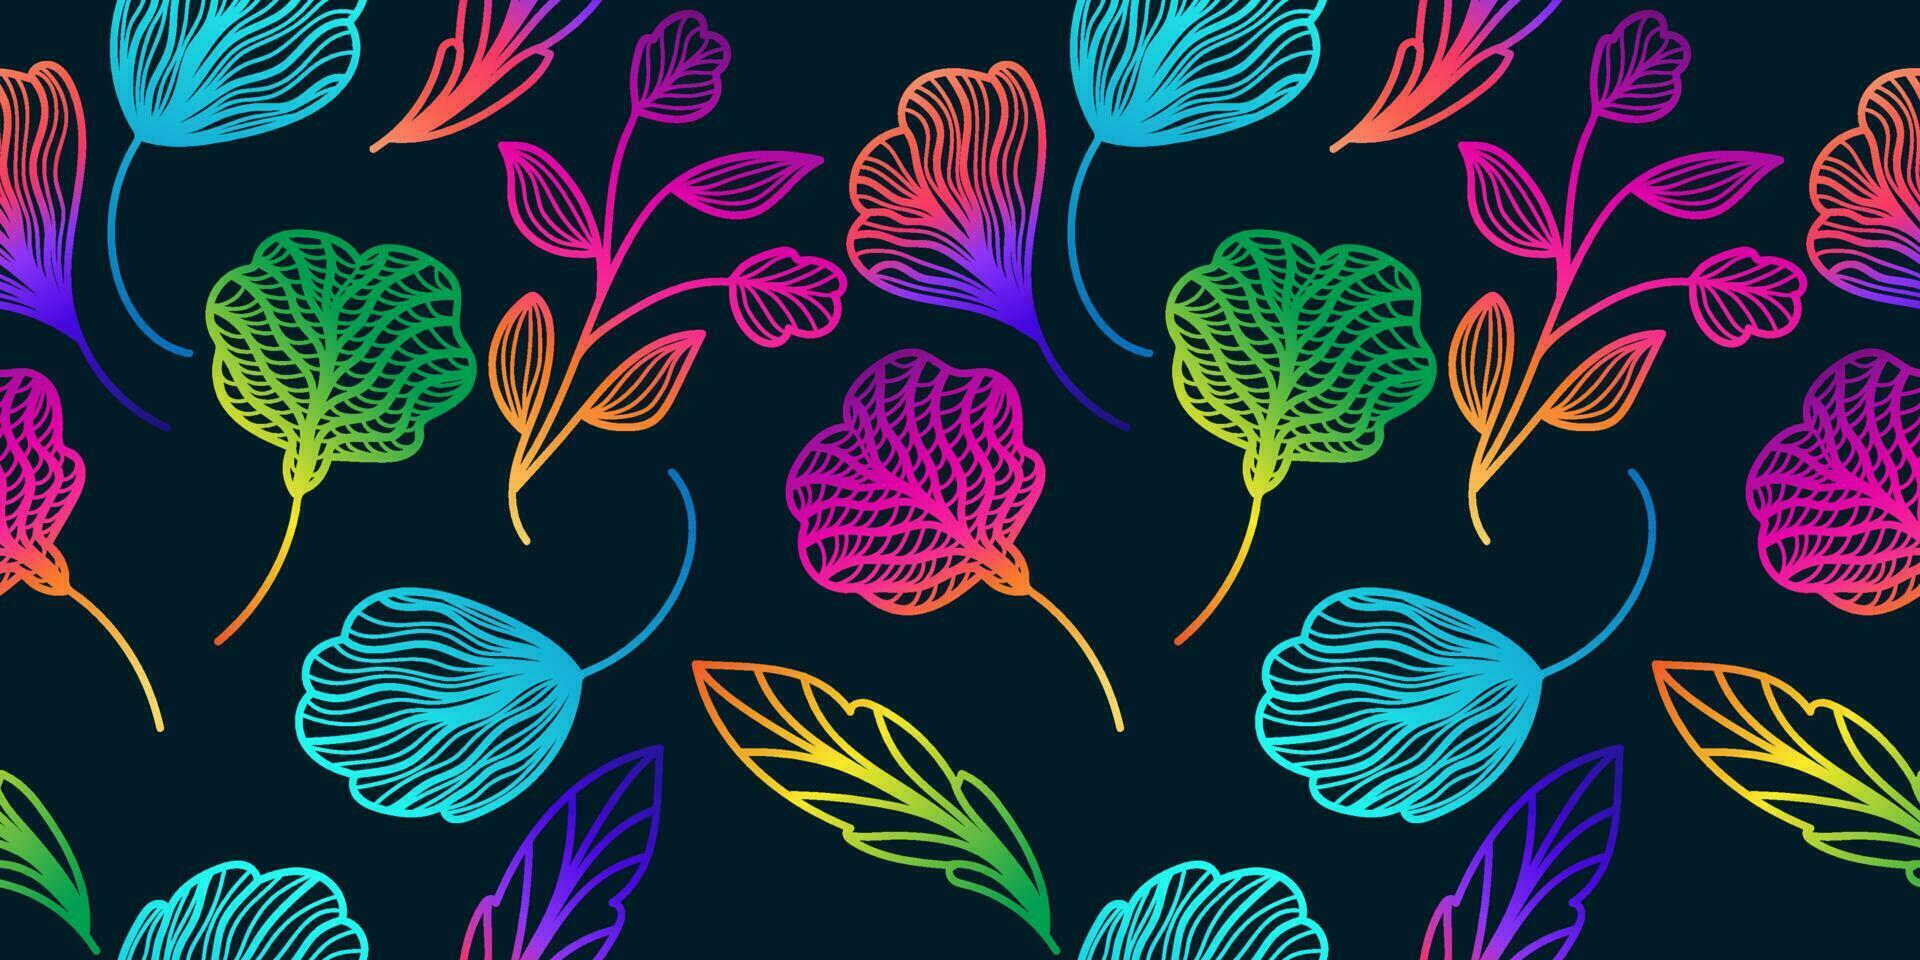 Colorful Seamless Floral Pattern with Gradient Style. Hand Drawn Flower Motif for Fashion, Wallpaper, Wrapping Paper, Background, Fabric, Textile, Apparel, and Card Design vector